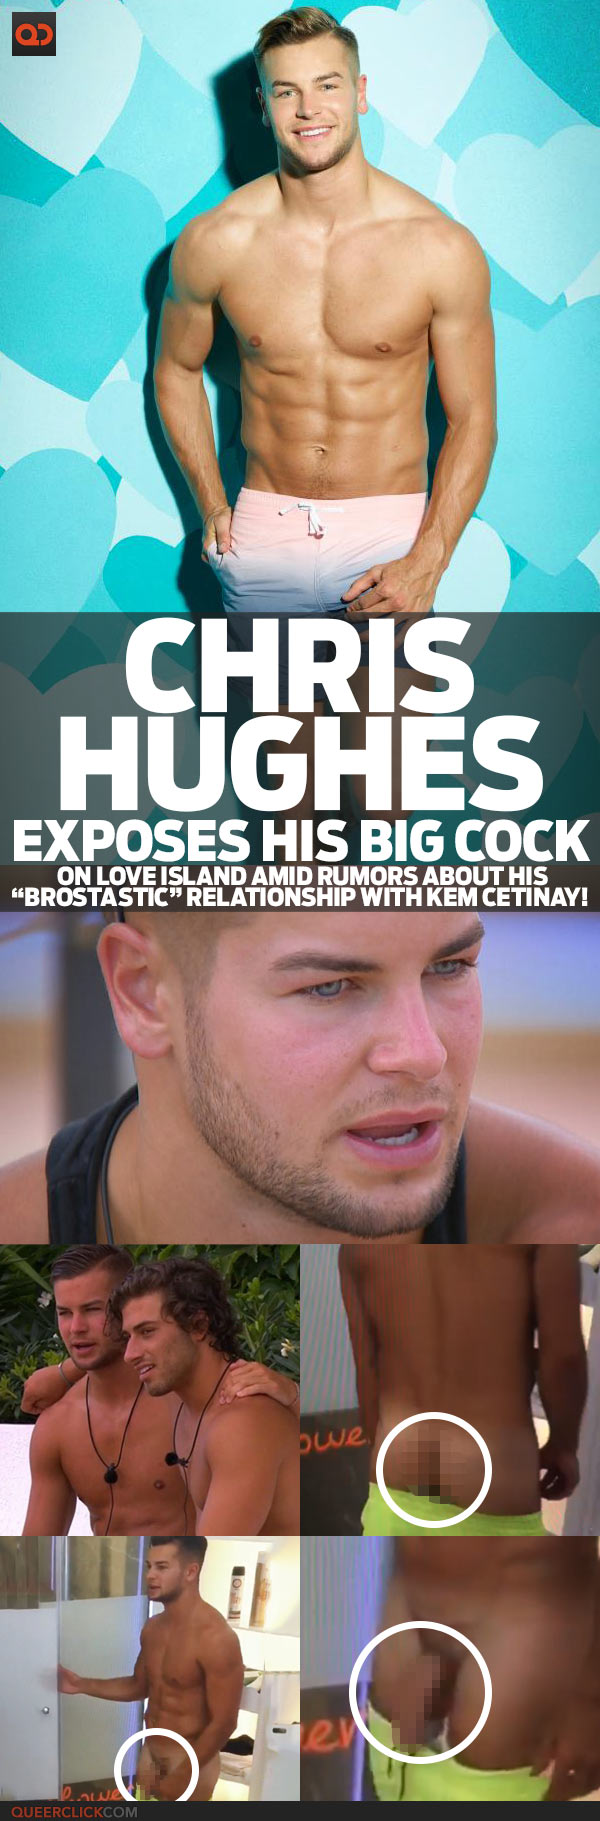 Chris Hughes Exposes His Big Cock On Love Island Amid Rumors About His “Brostastic” Relationship With Kem Cetinay!